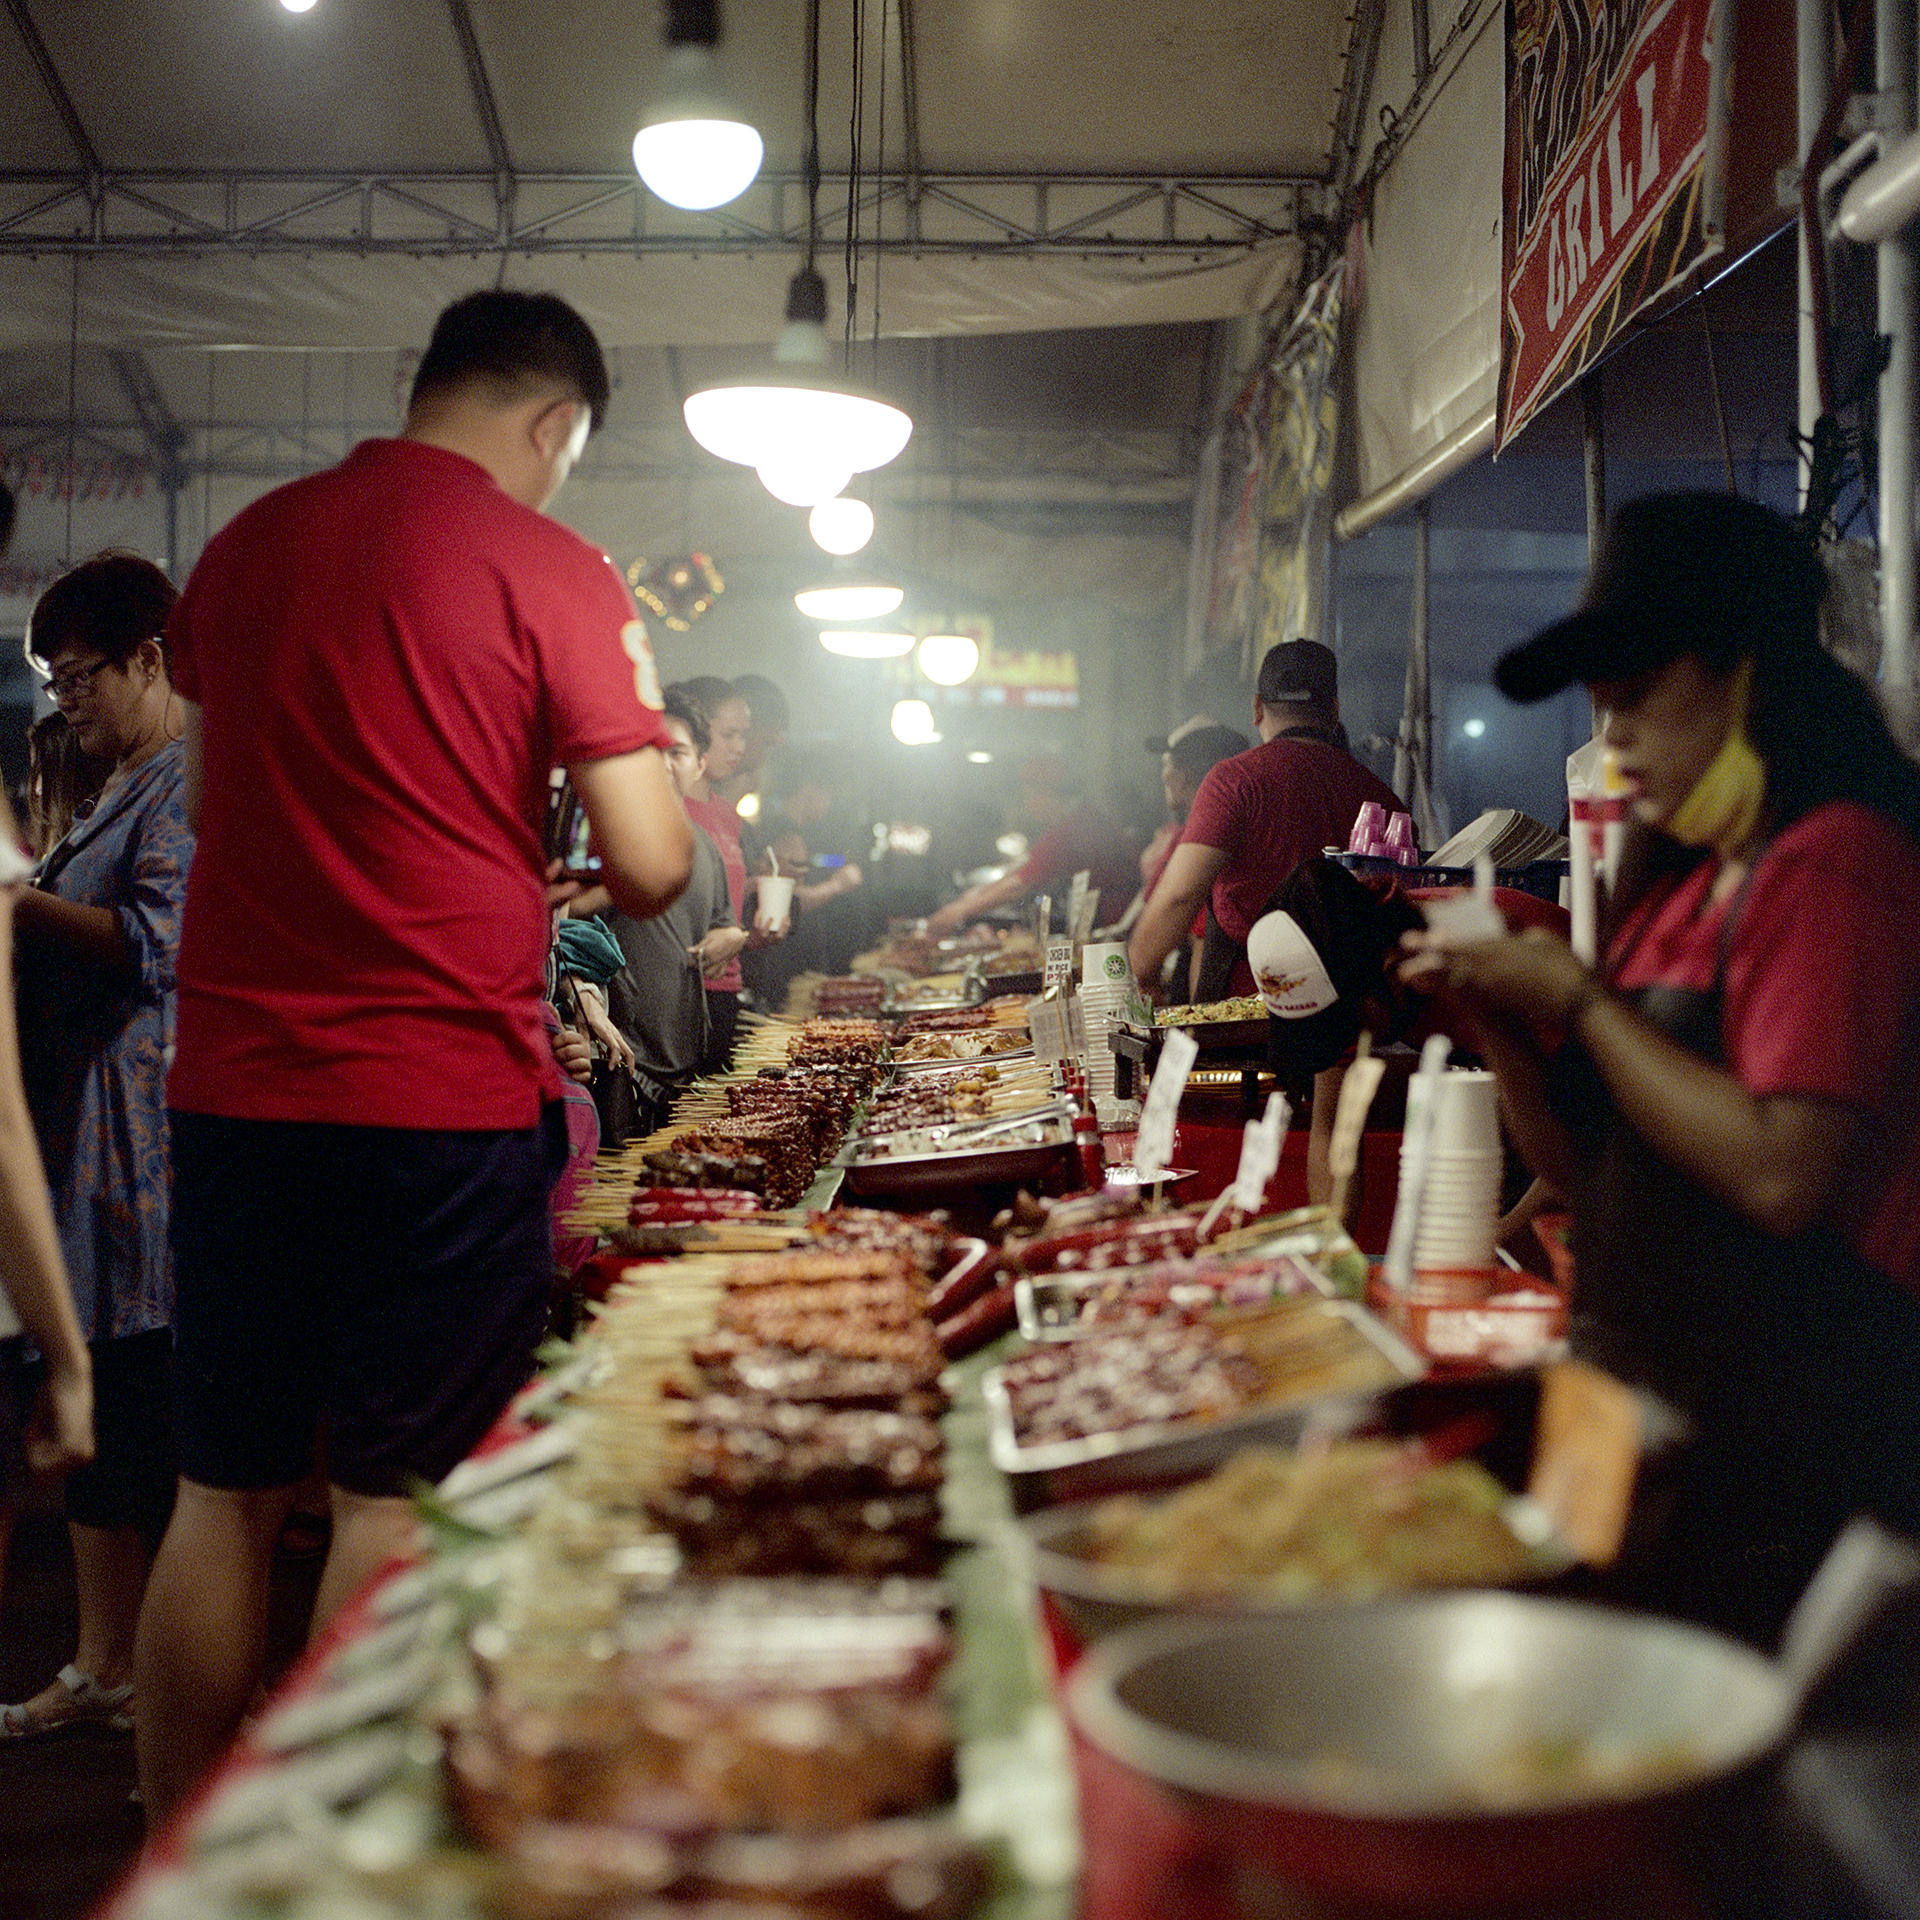 Looking down the row of all the food options at a night market